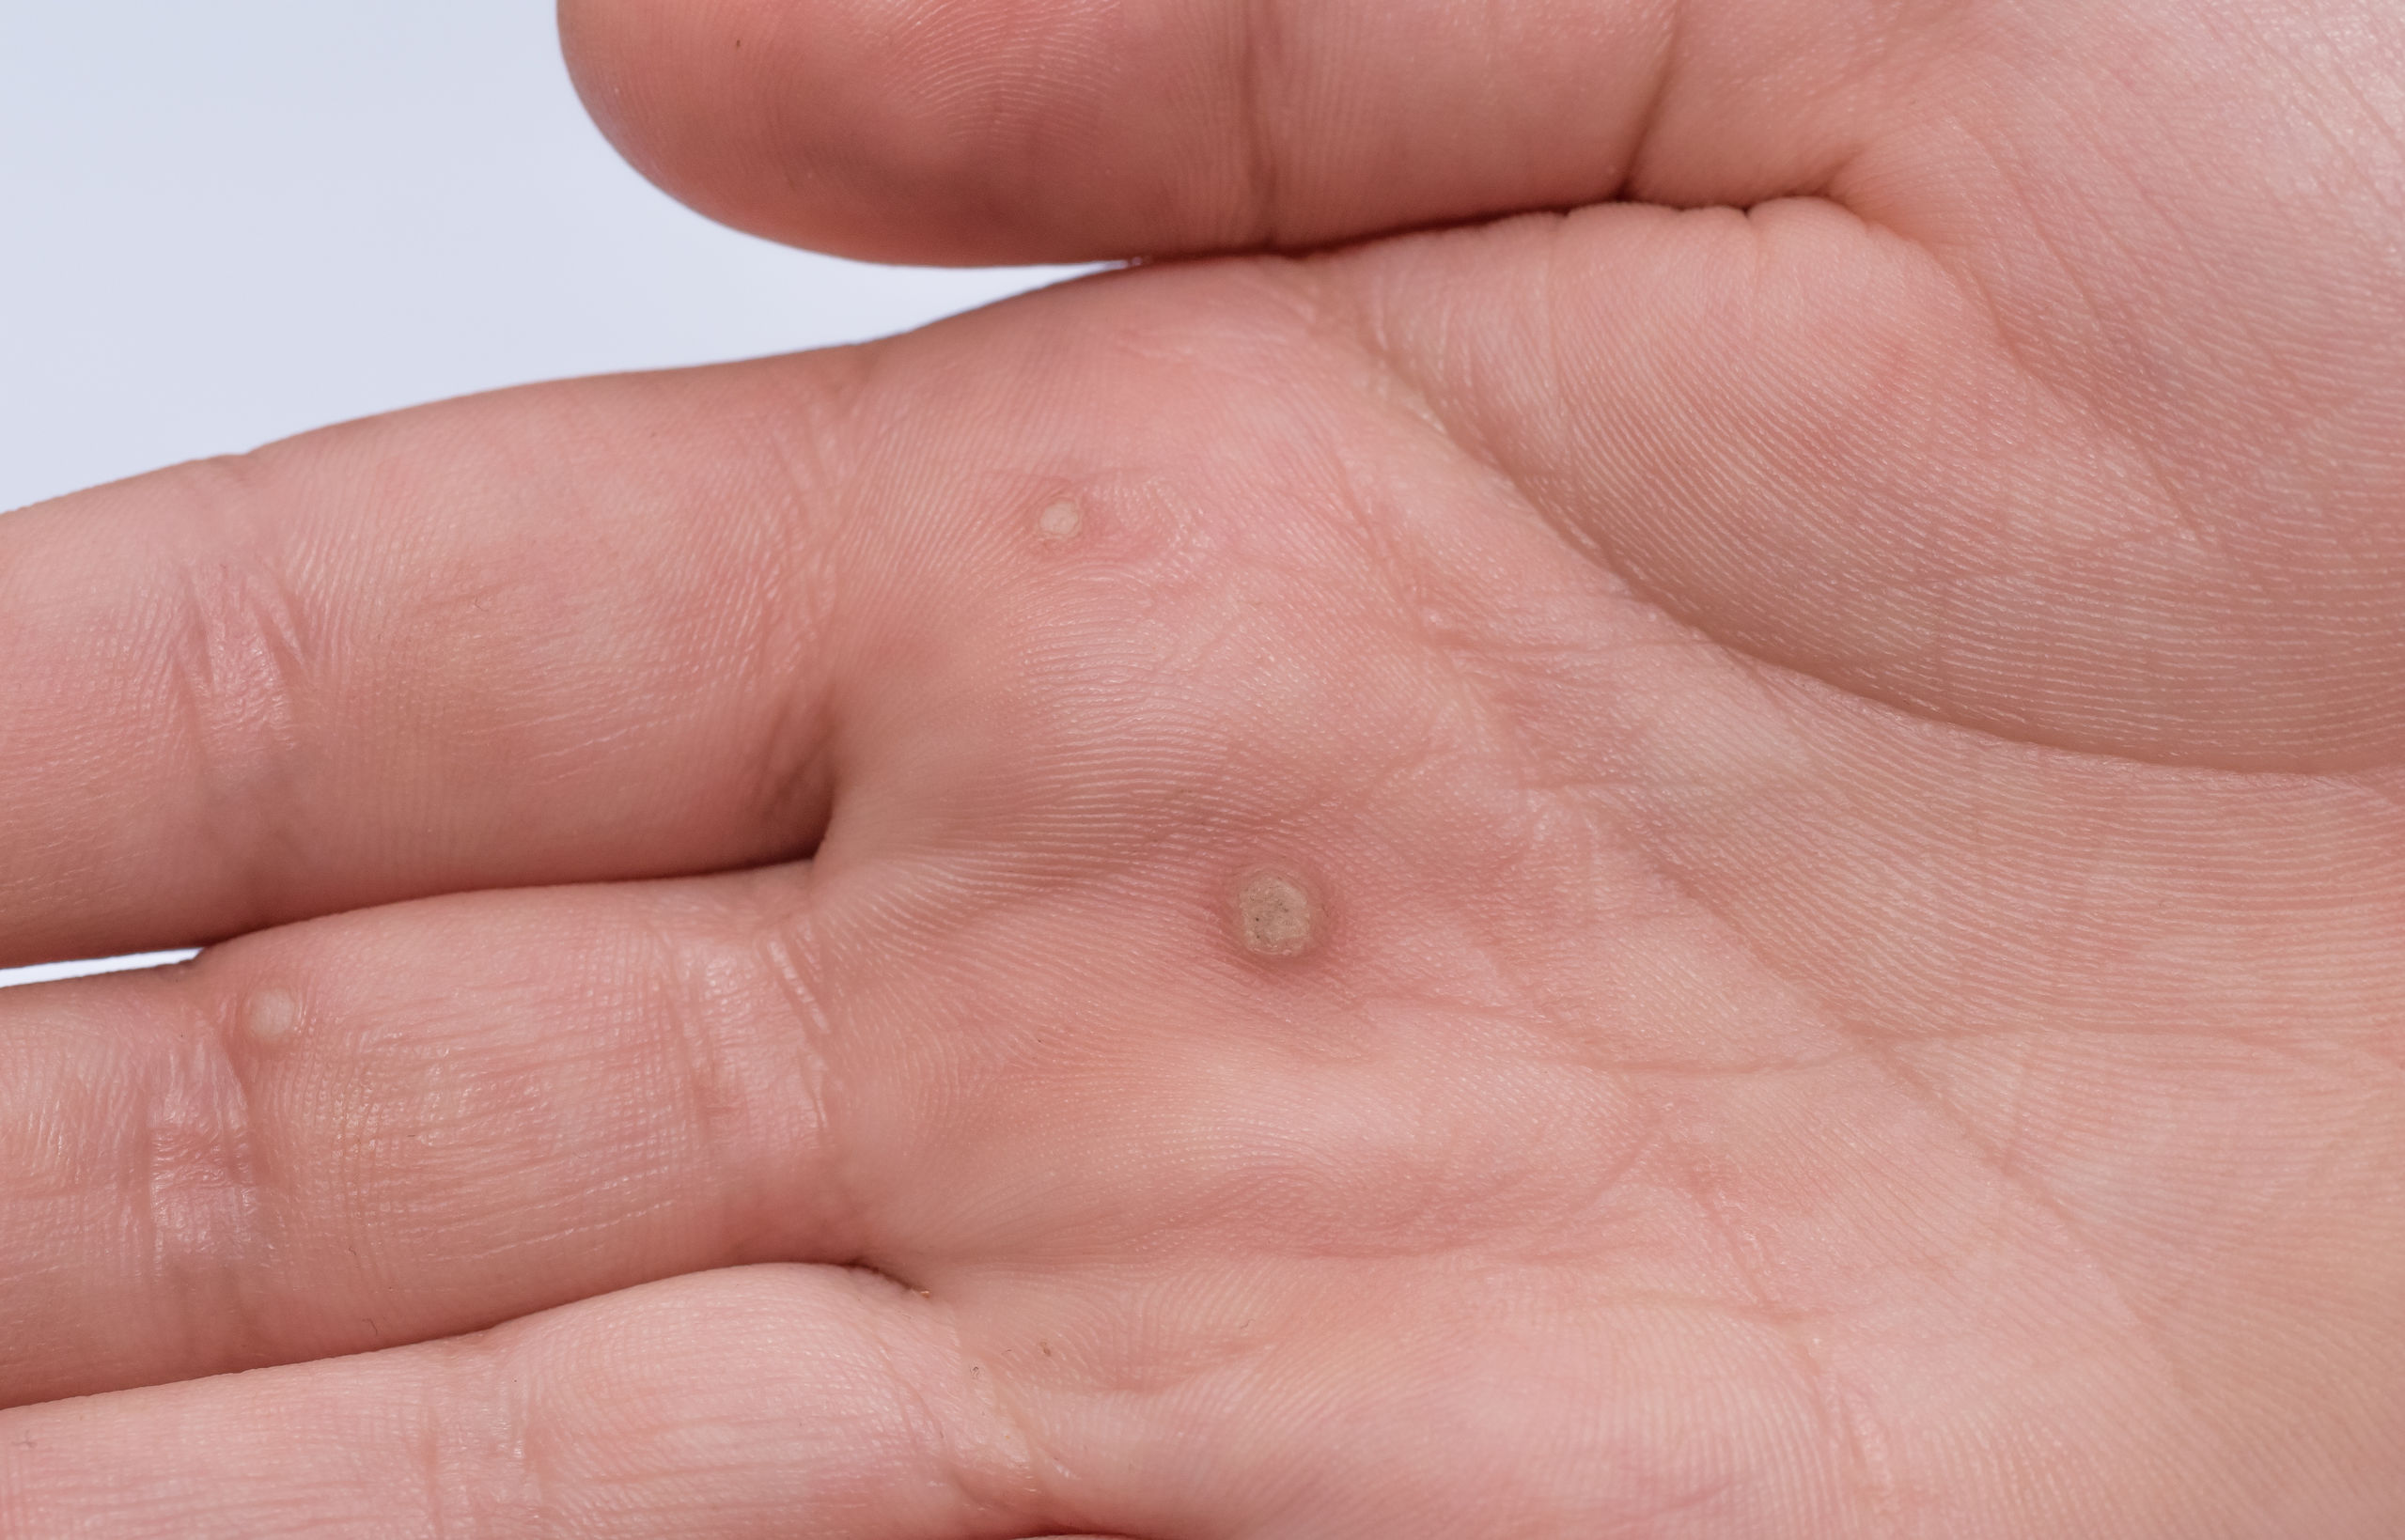 warts on hands and body)